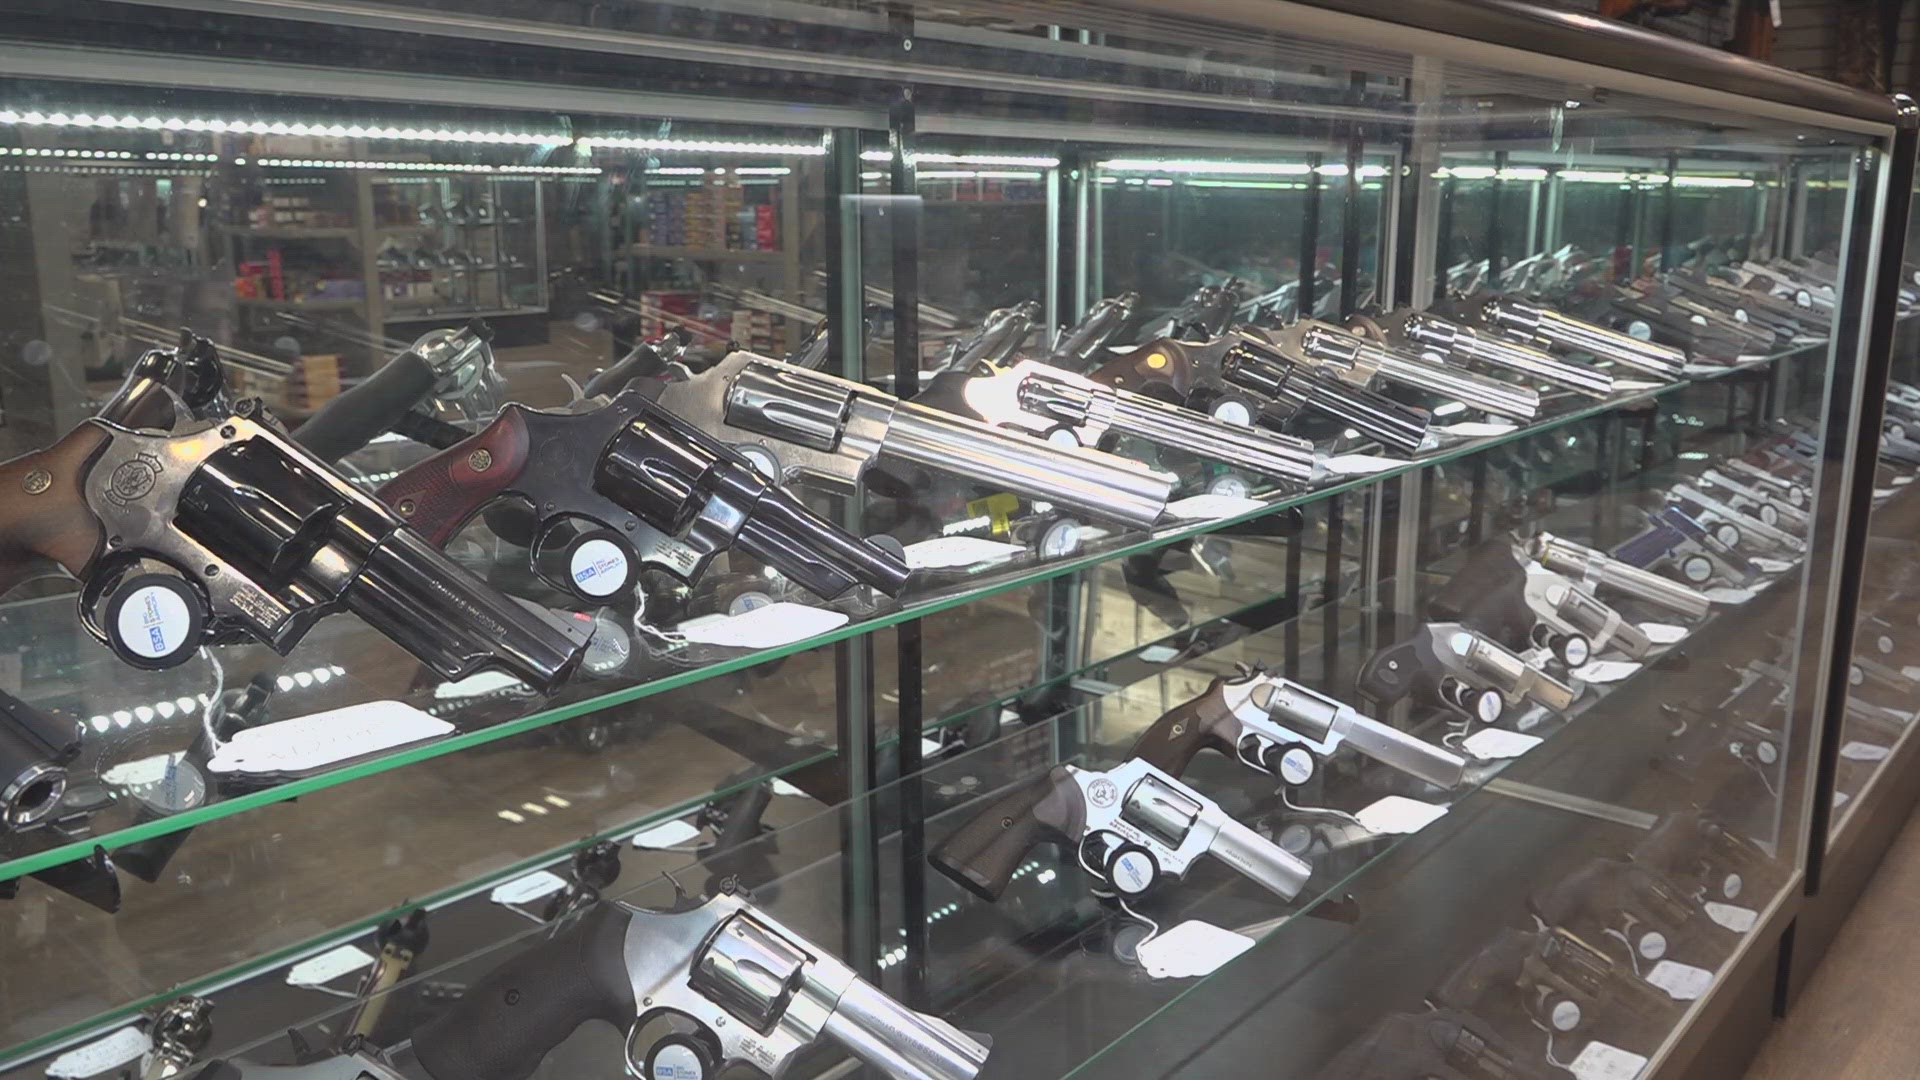 A rise in gun thefts is prompting further precautions when it comes to gun storage